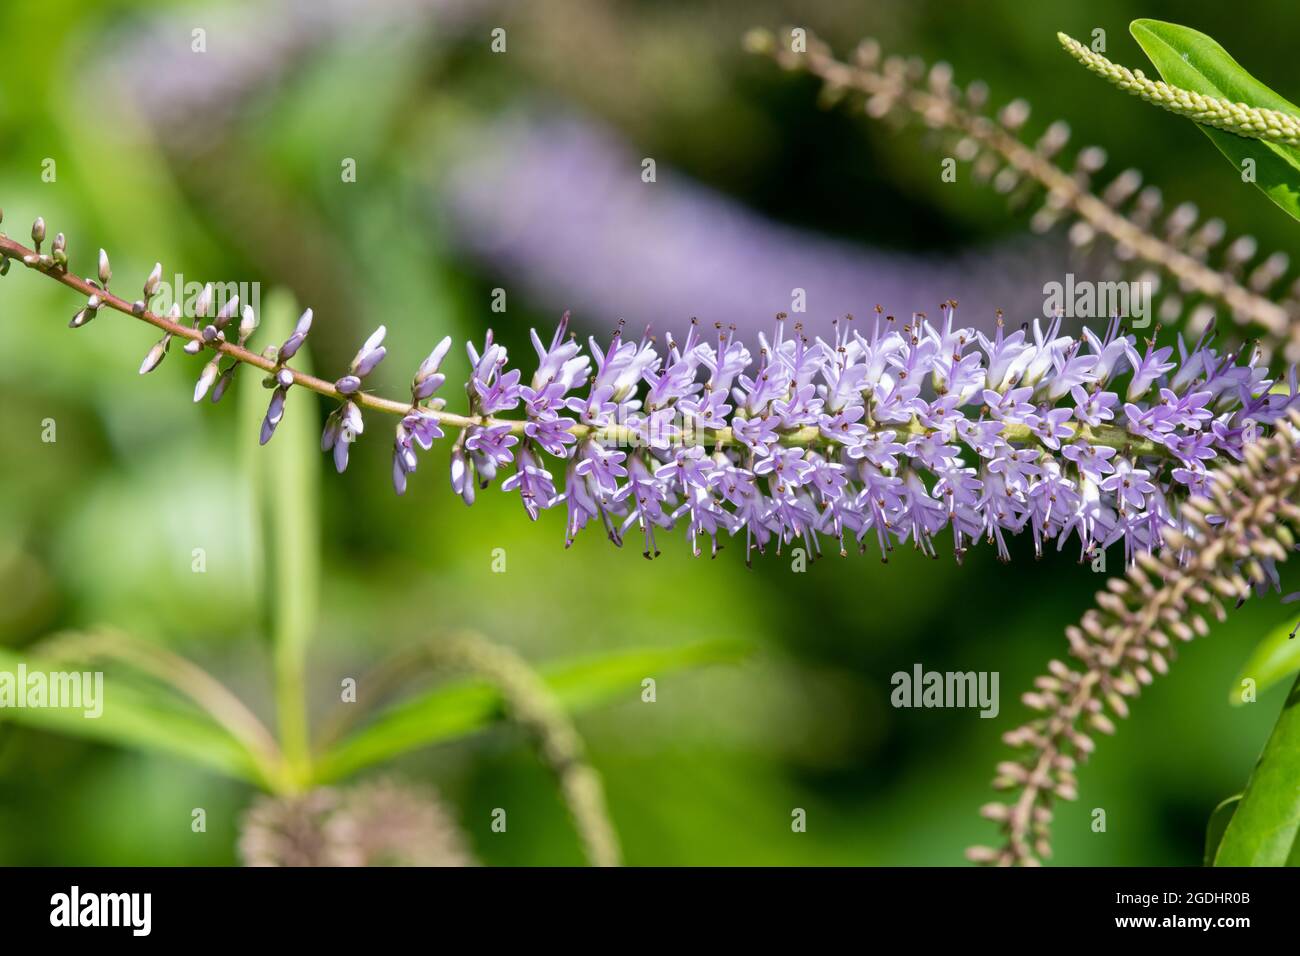 Close up of flowers on a willow leaf hebe (veronica salicifolia) plant Stock Photo